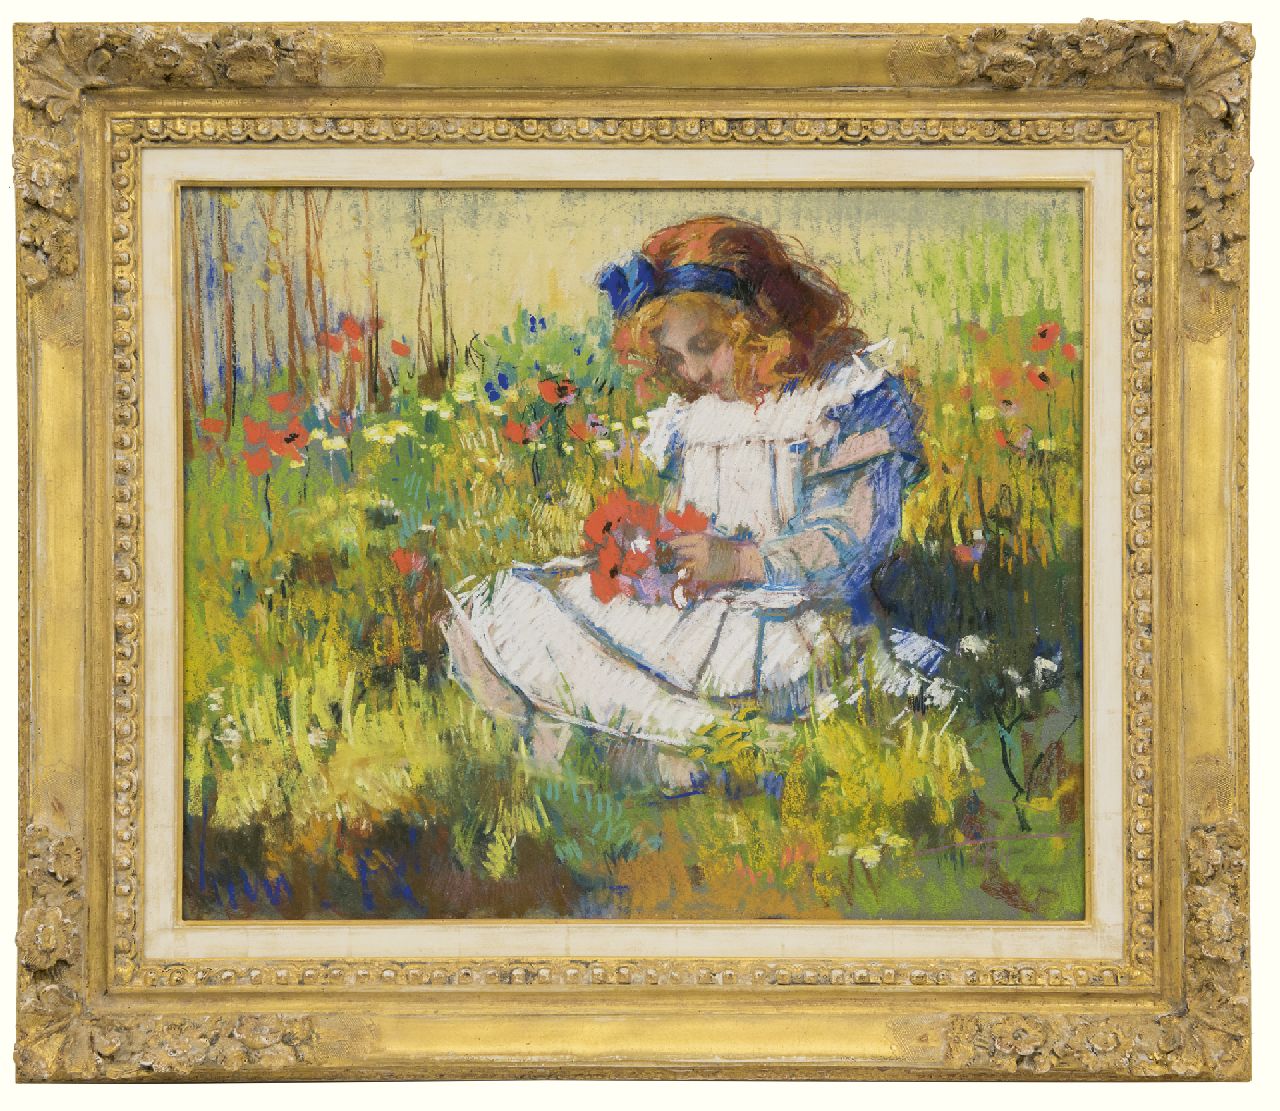 Graafland R.A.A.J.  | Robert Archibald Antonius Joan 'Rob' Graafland | Watercolours and drawings offered for sale | The painter's daughter in a flowering meadow, pastel on paper 51.9 x 63.5 cm, signed l.r. and dated 1911